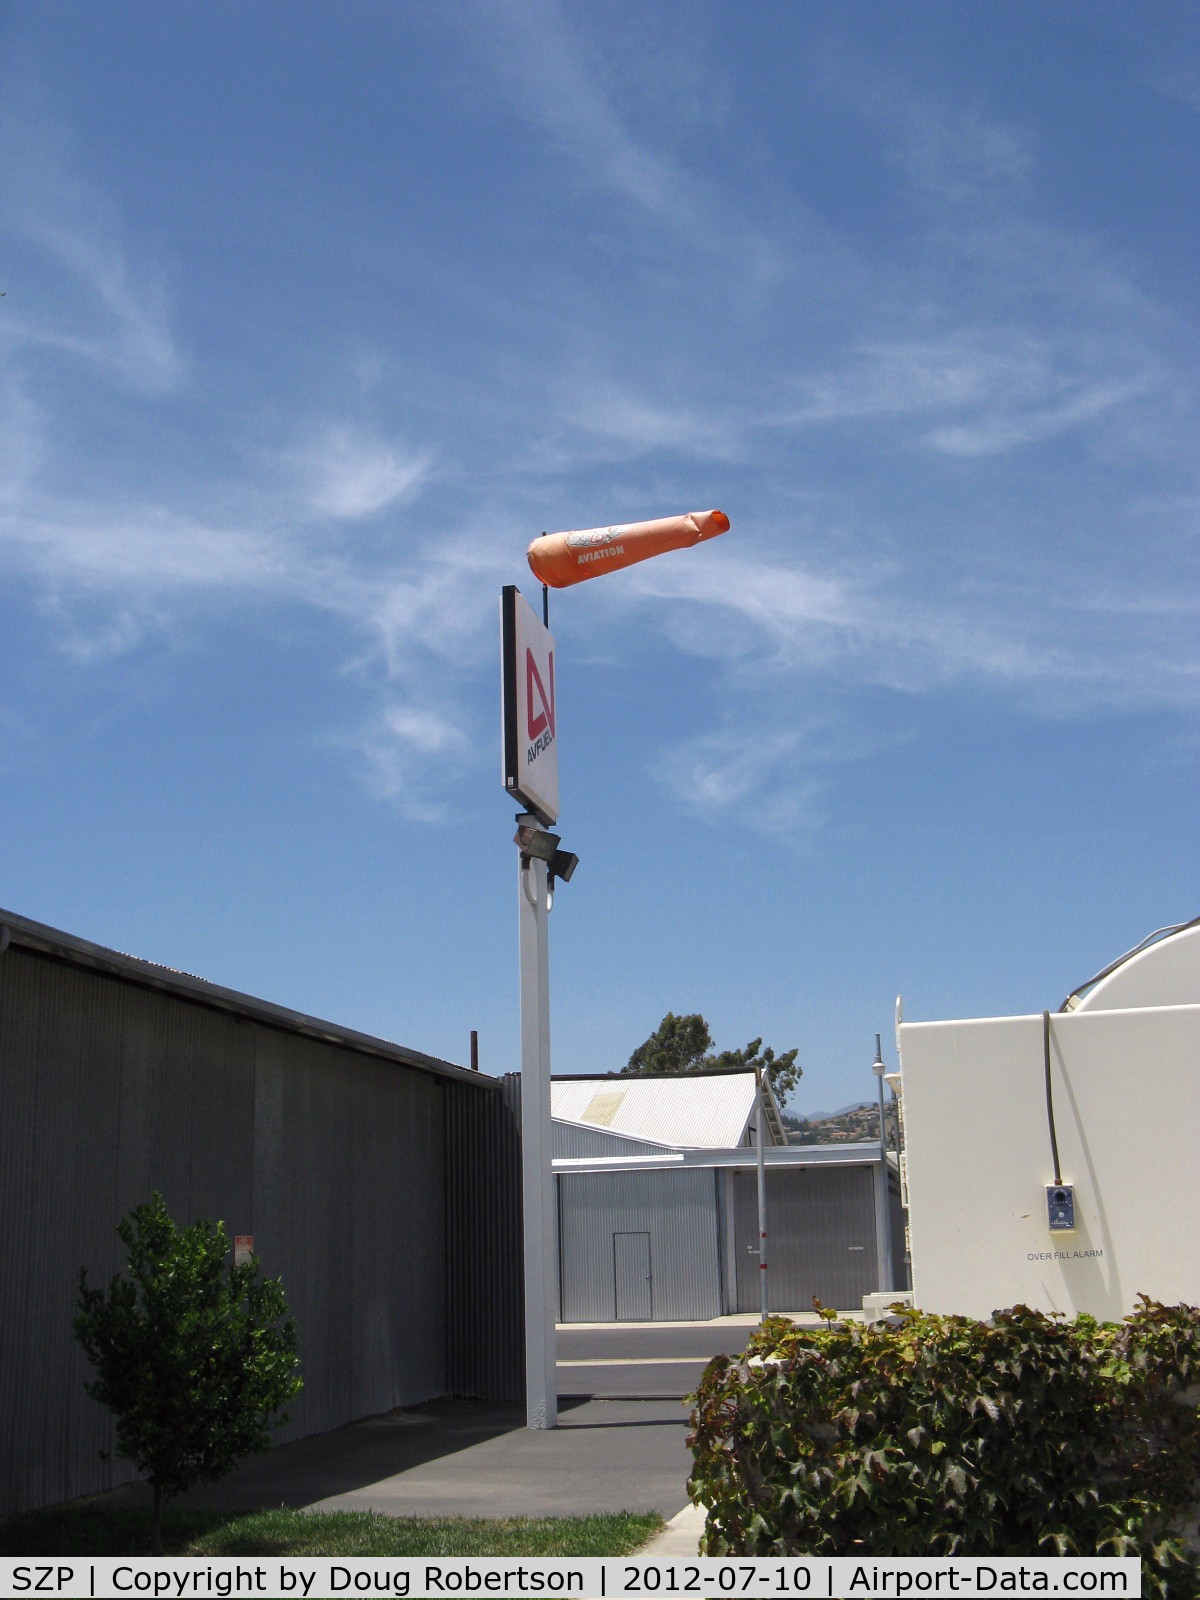 Santa Paula Airport (SZP) - Mid-Field Windsock in a strong wind with gusts forcing some landing go-arounds on Rwy 22